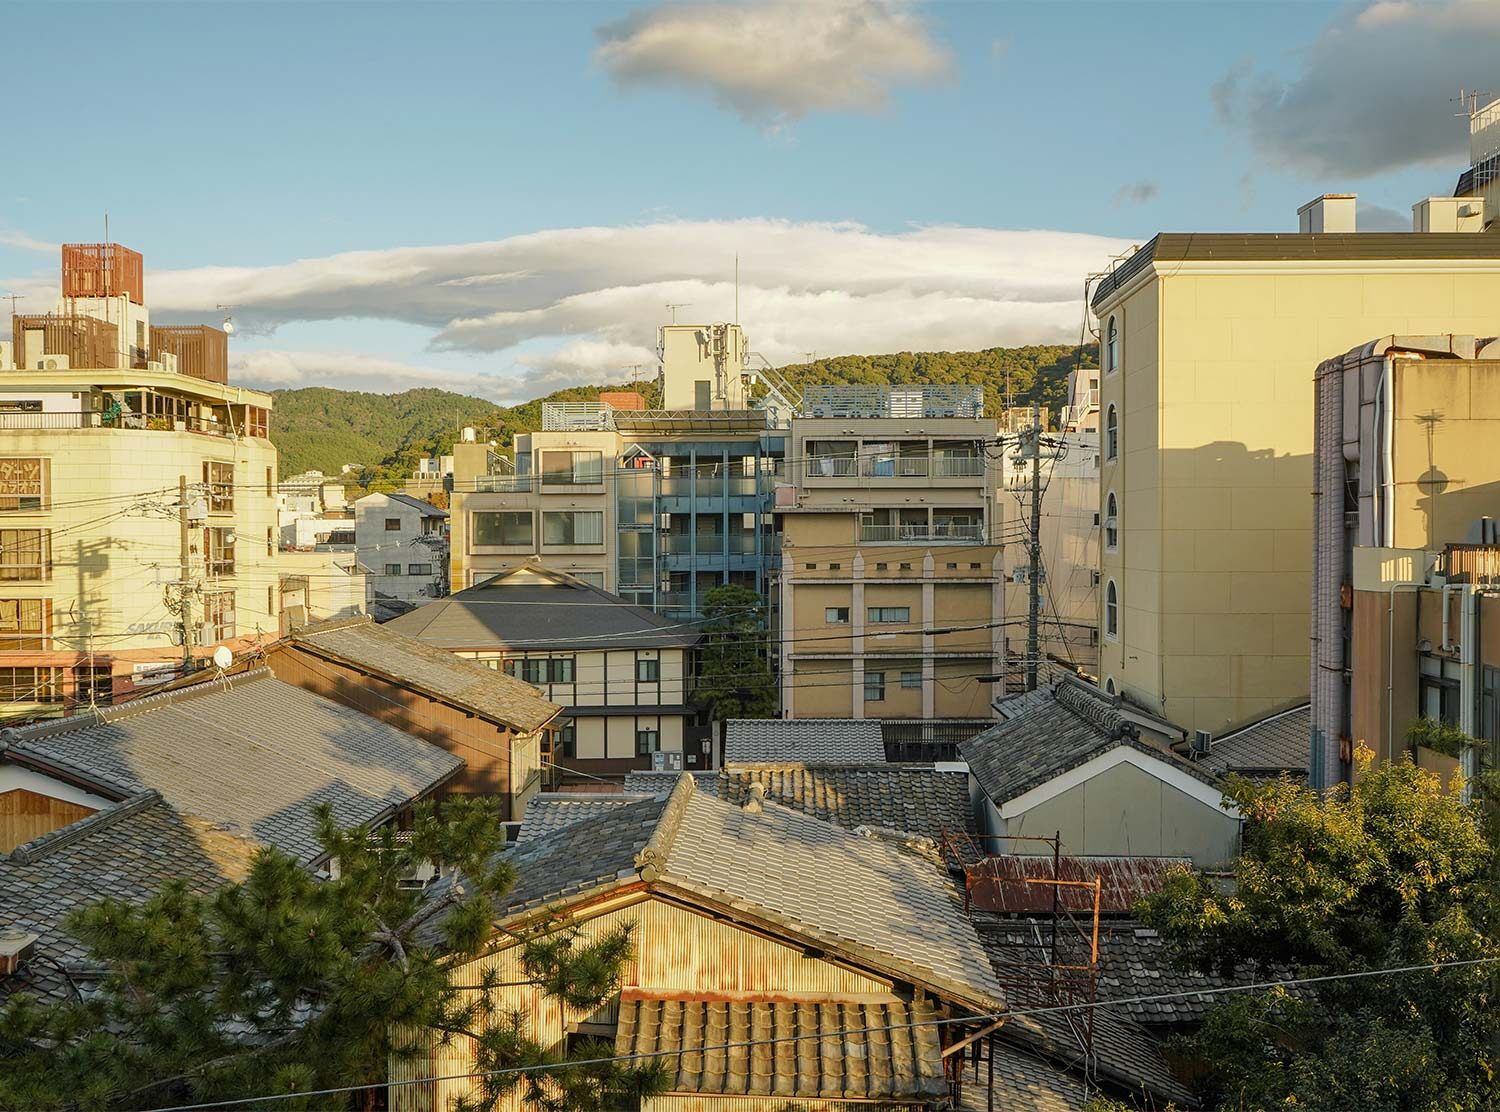 The Shinmonzen Golden hour light washing over the historical Gion District from our terrace